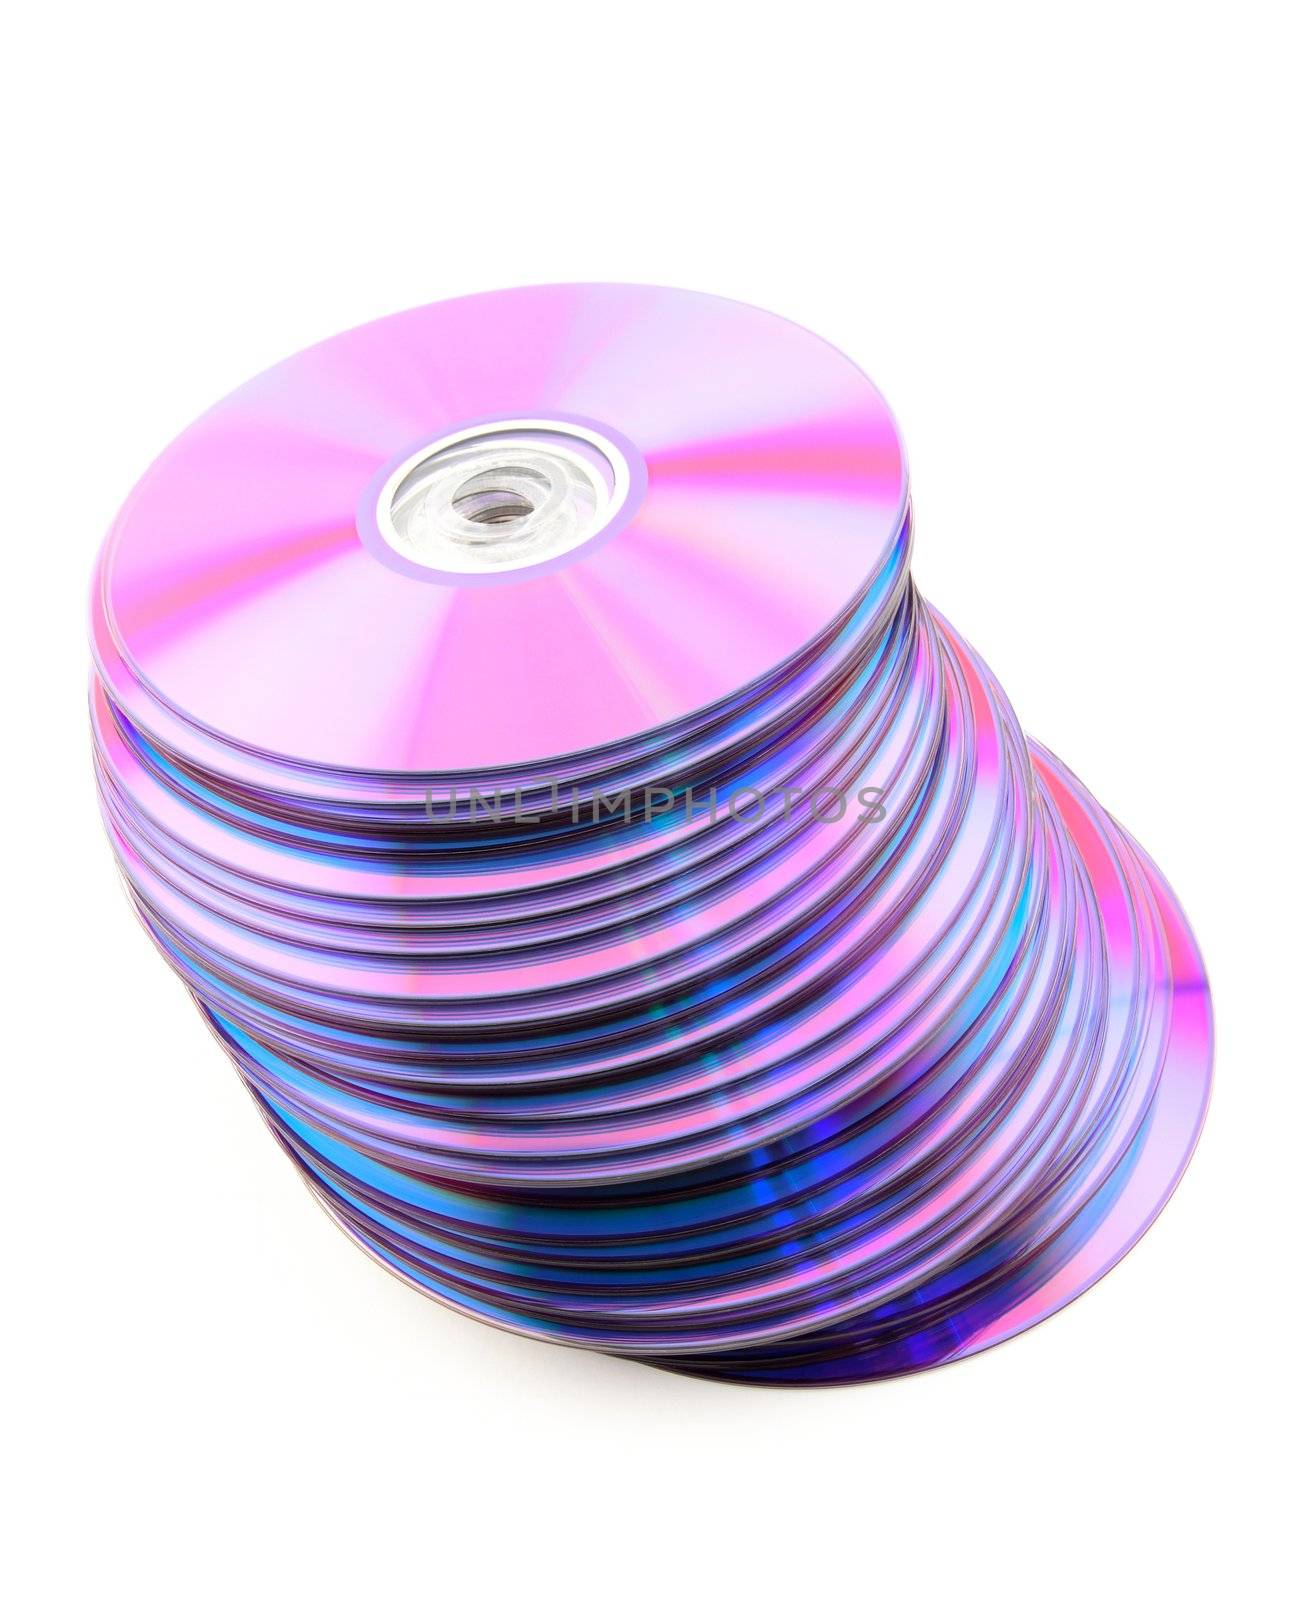 Falling heap of purple CDs or DVDs. White background, no dust.